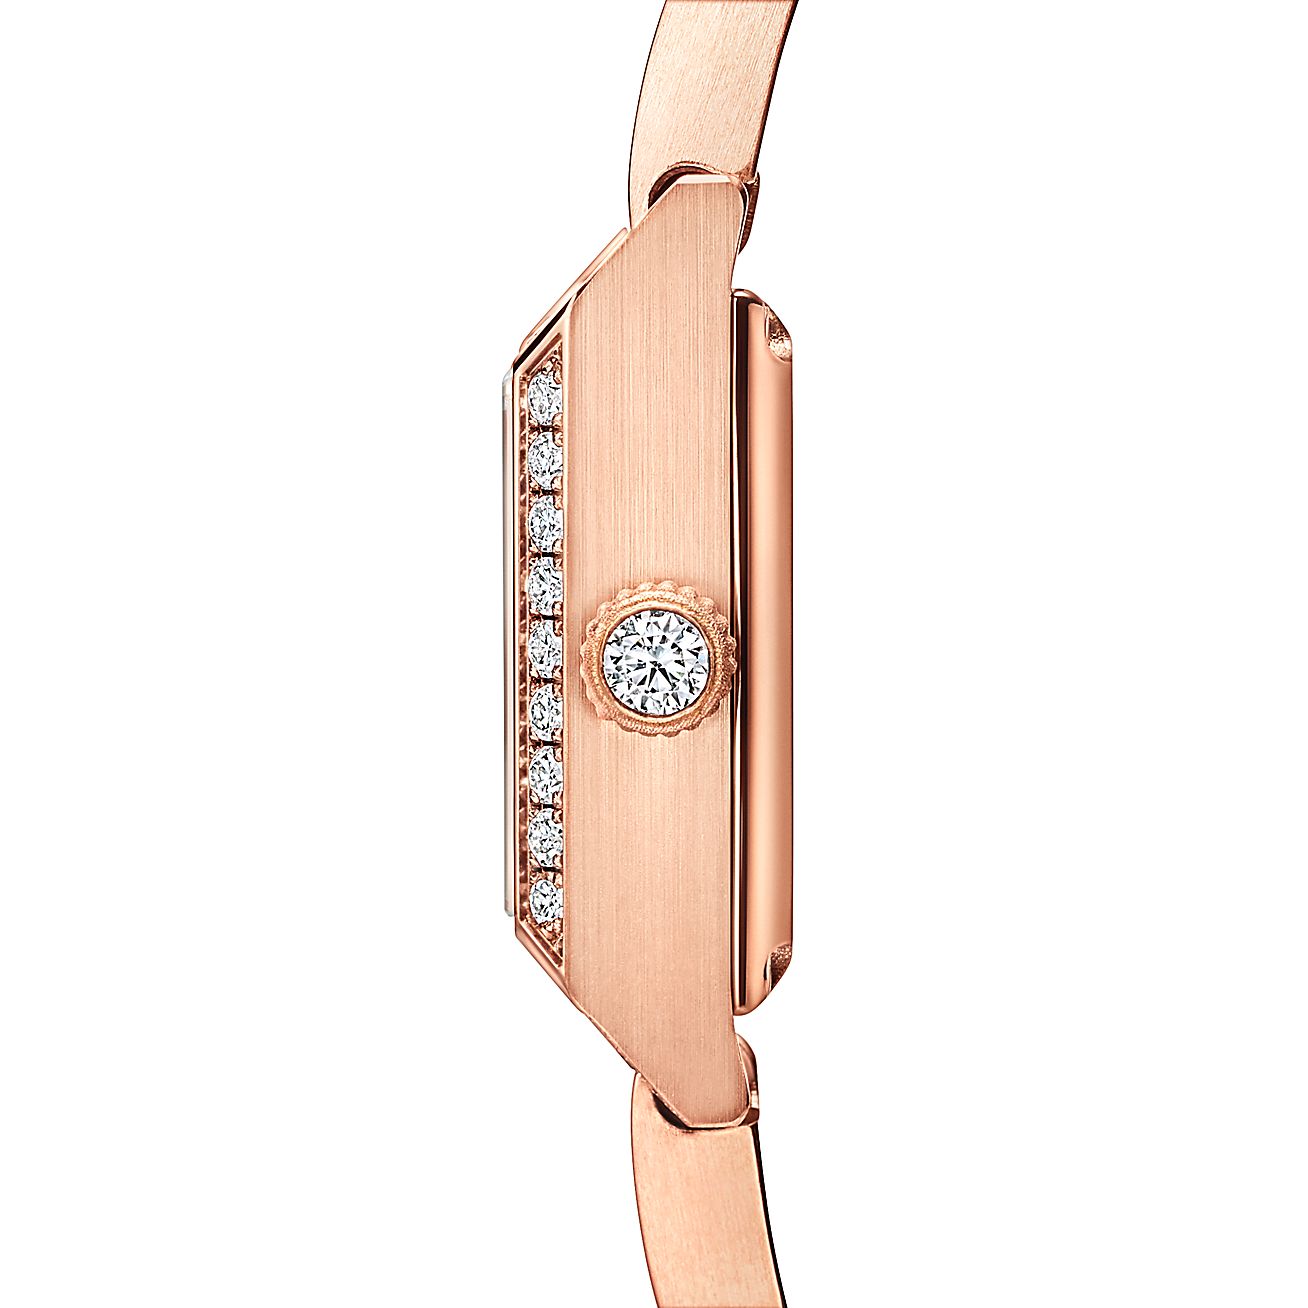 Tiffany 1837 Makers 16 mm Square Watch in Rose Gold with a White Dial